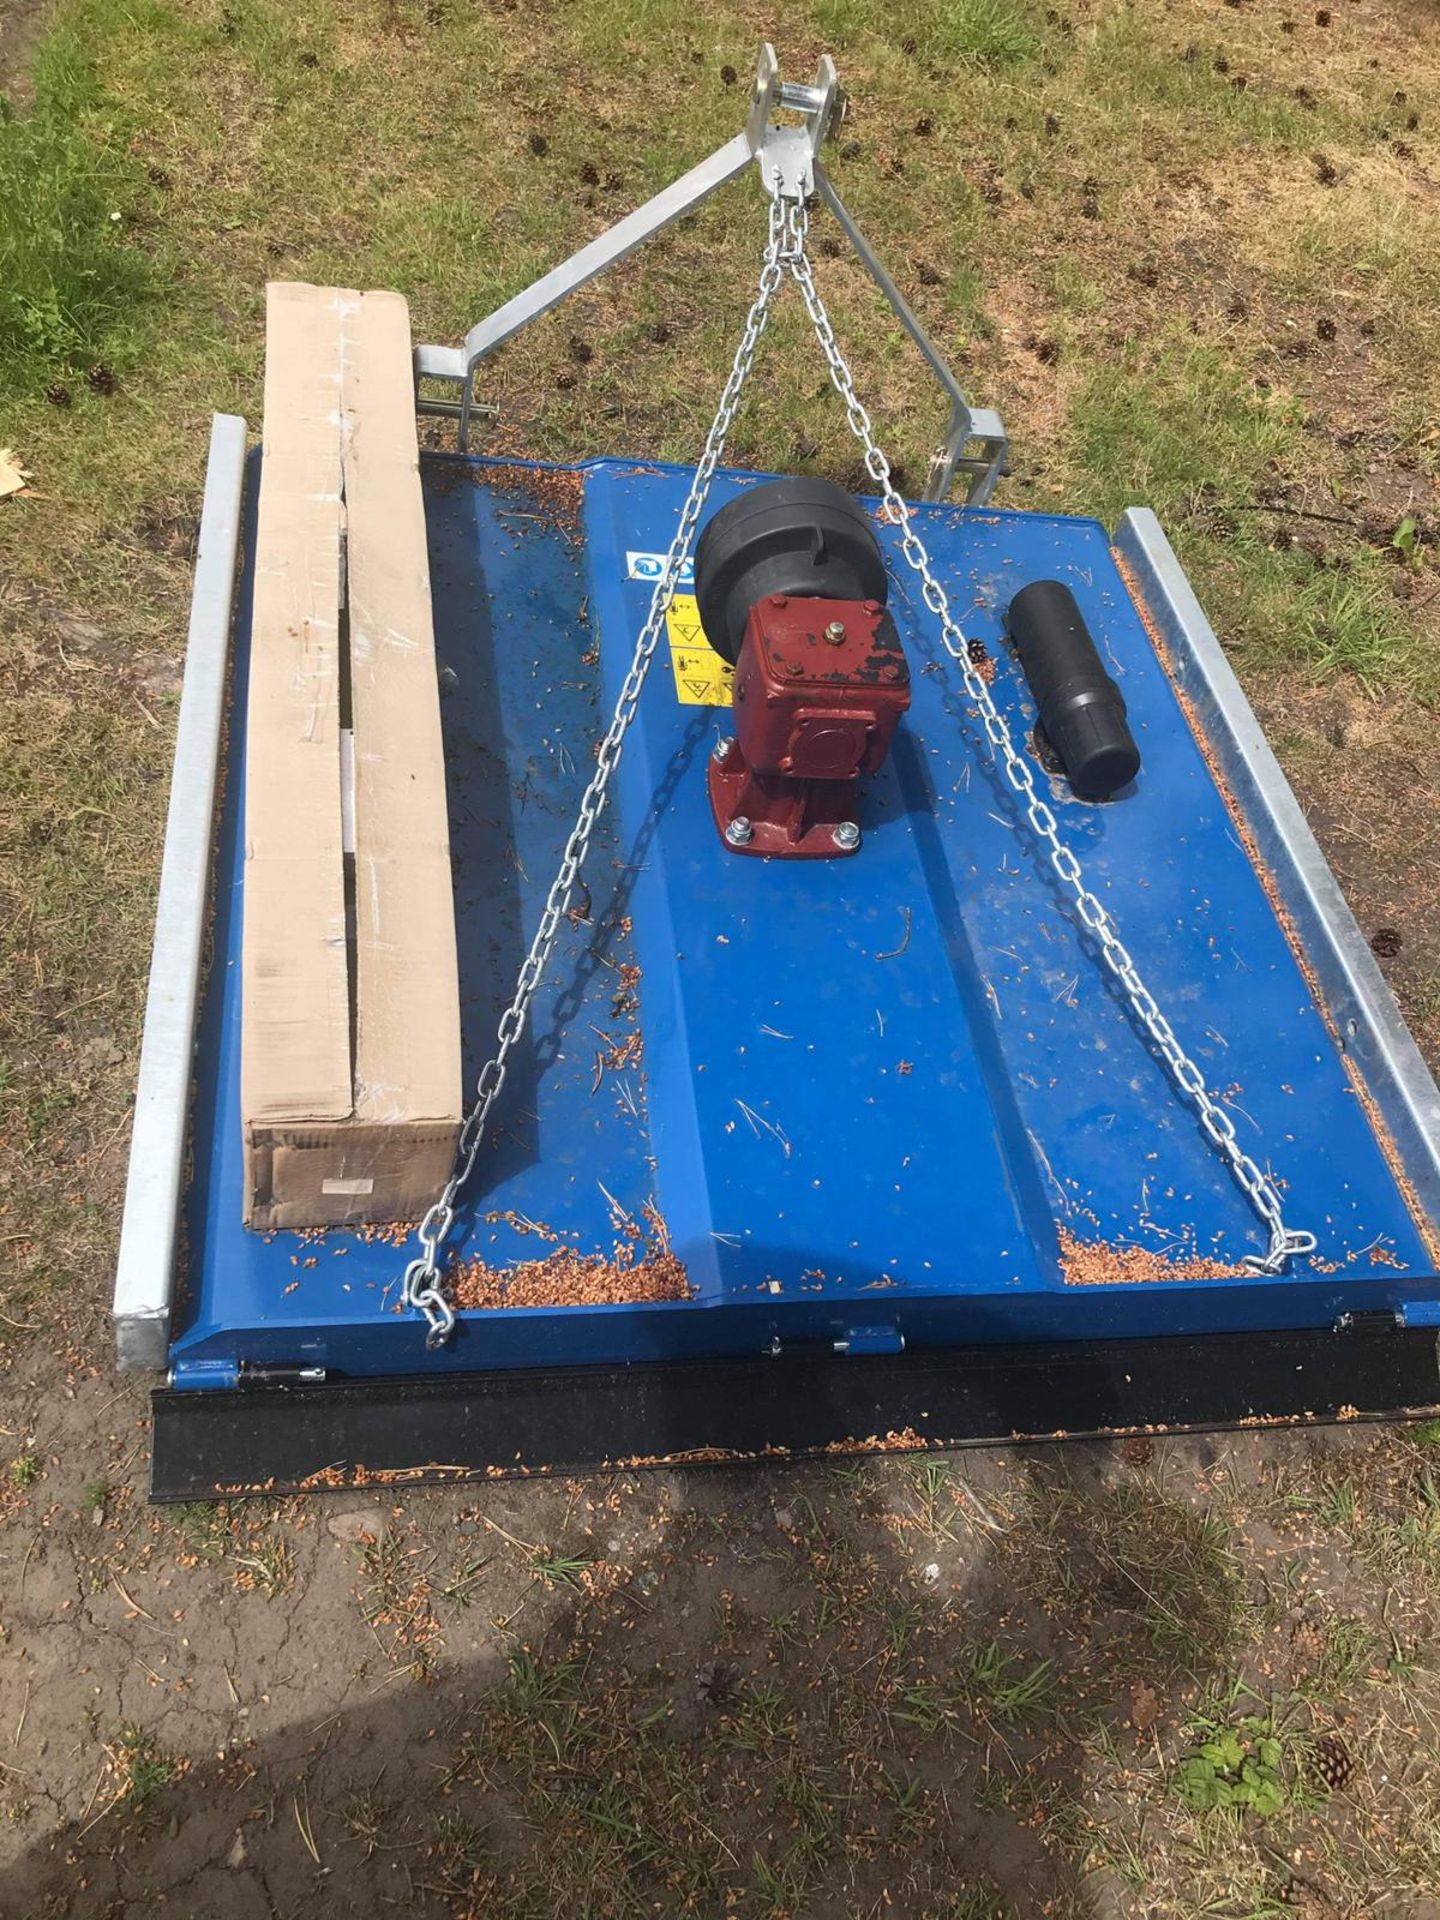 NEW AND UNUSED 4ft TOPPER SUITABLE FOR 3 POINT LINKAGE, PTO DRIVEN COMPLETE WITH SHAFT *PLUS VAT* - Image 3 of 3